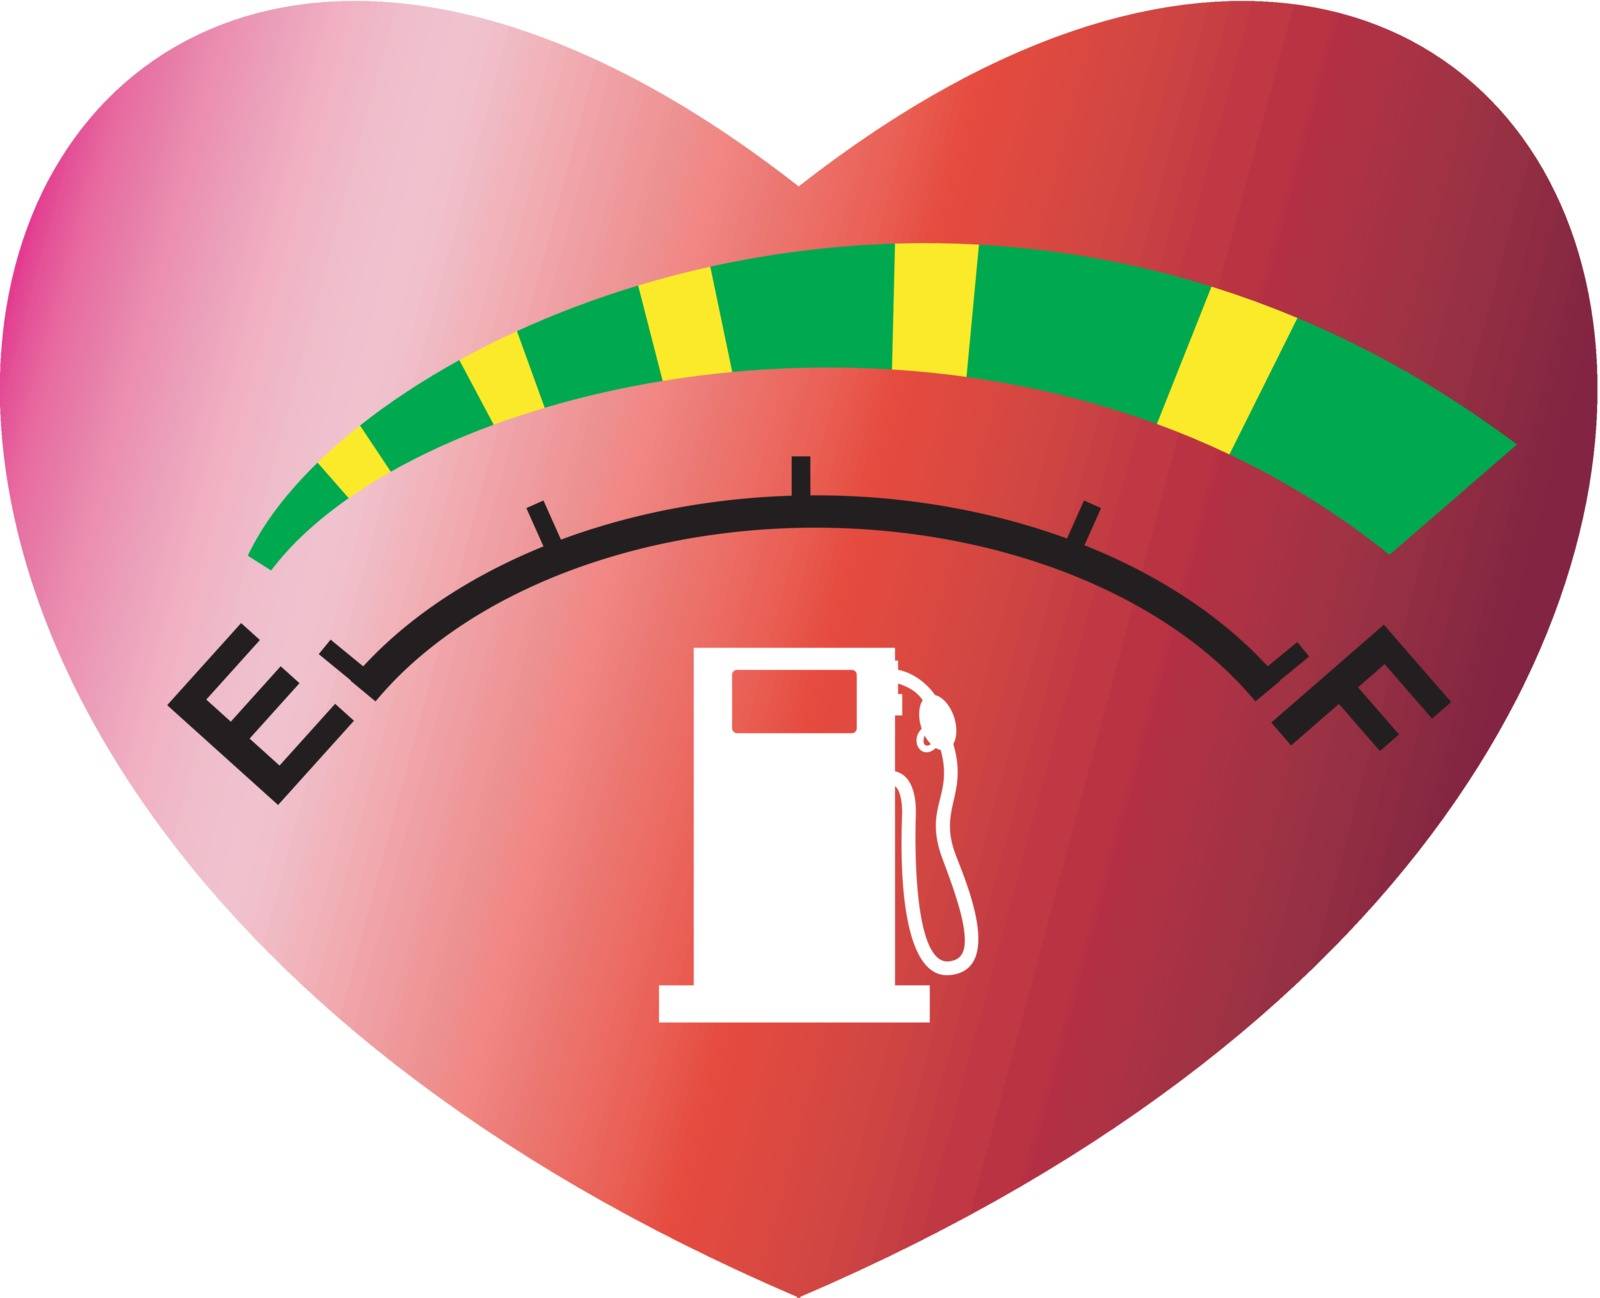 illustration of a fuel gage meter showing empty to full set inside heart shape on isolated white background